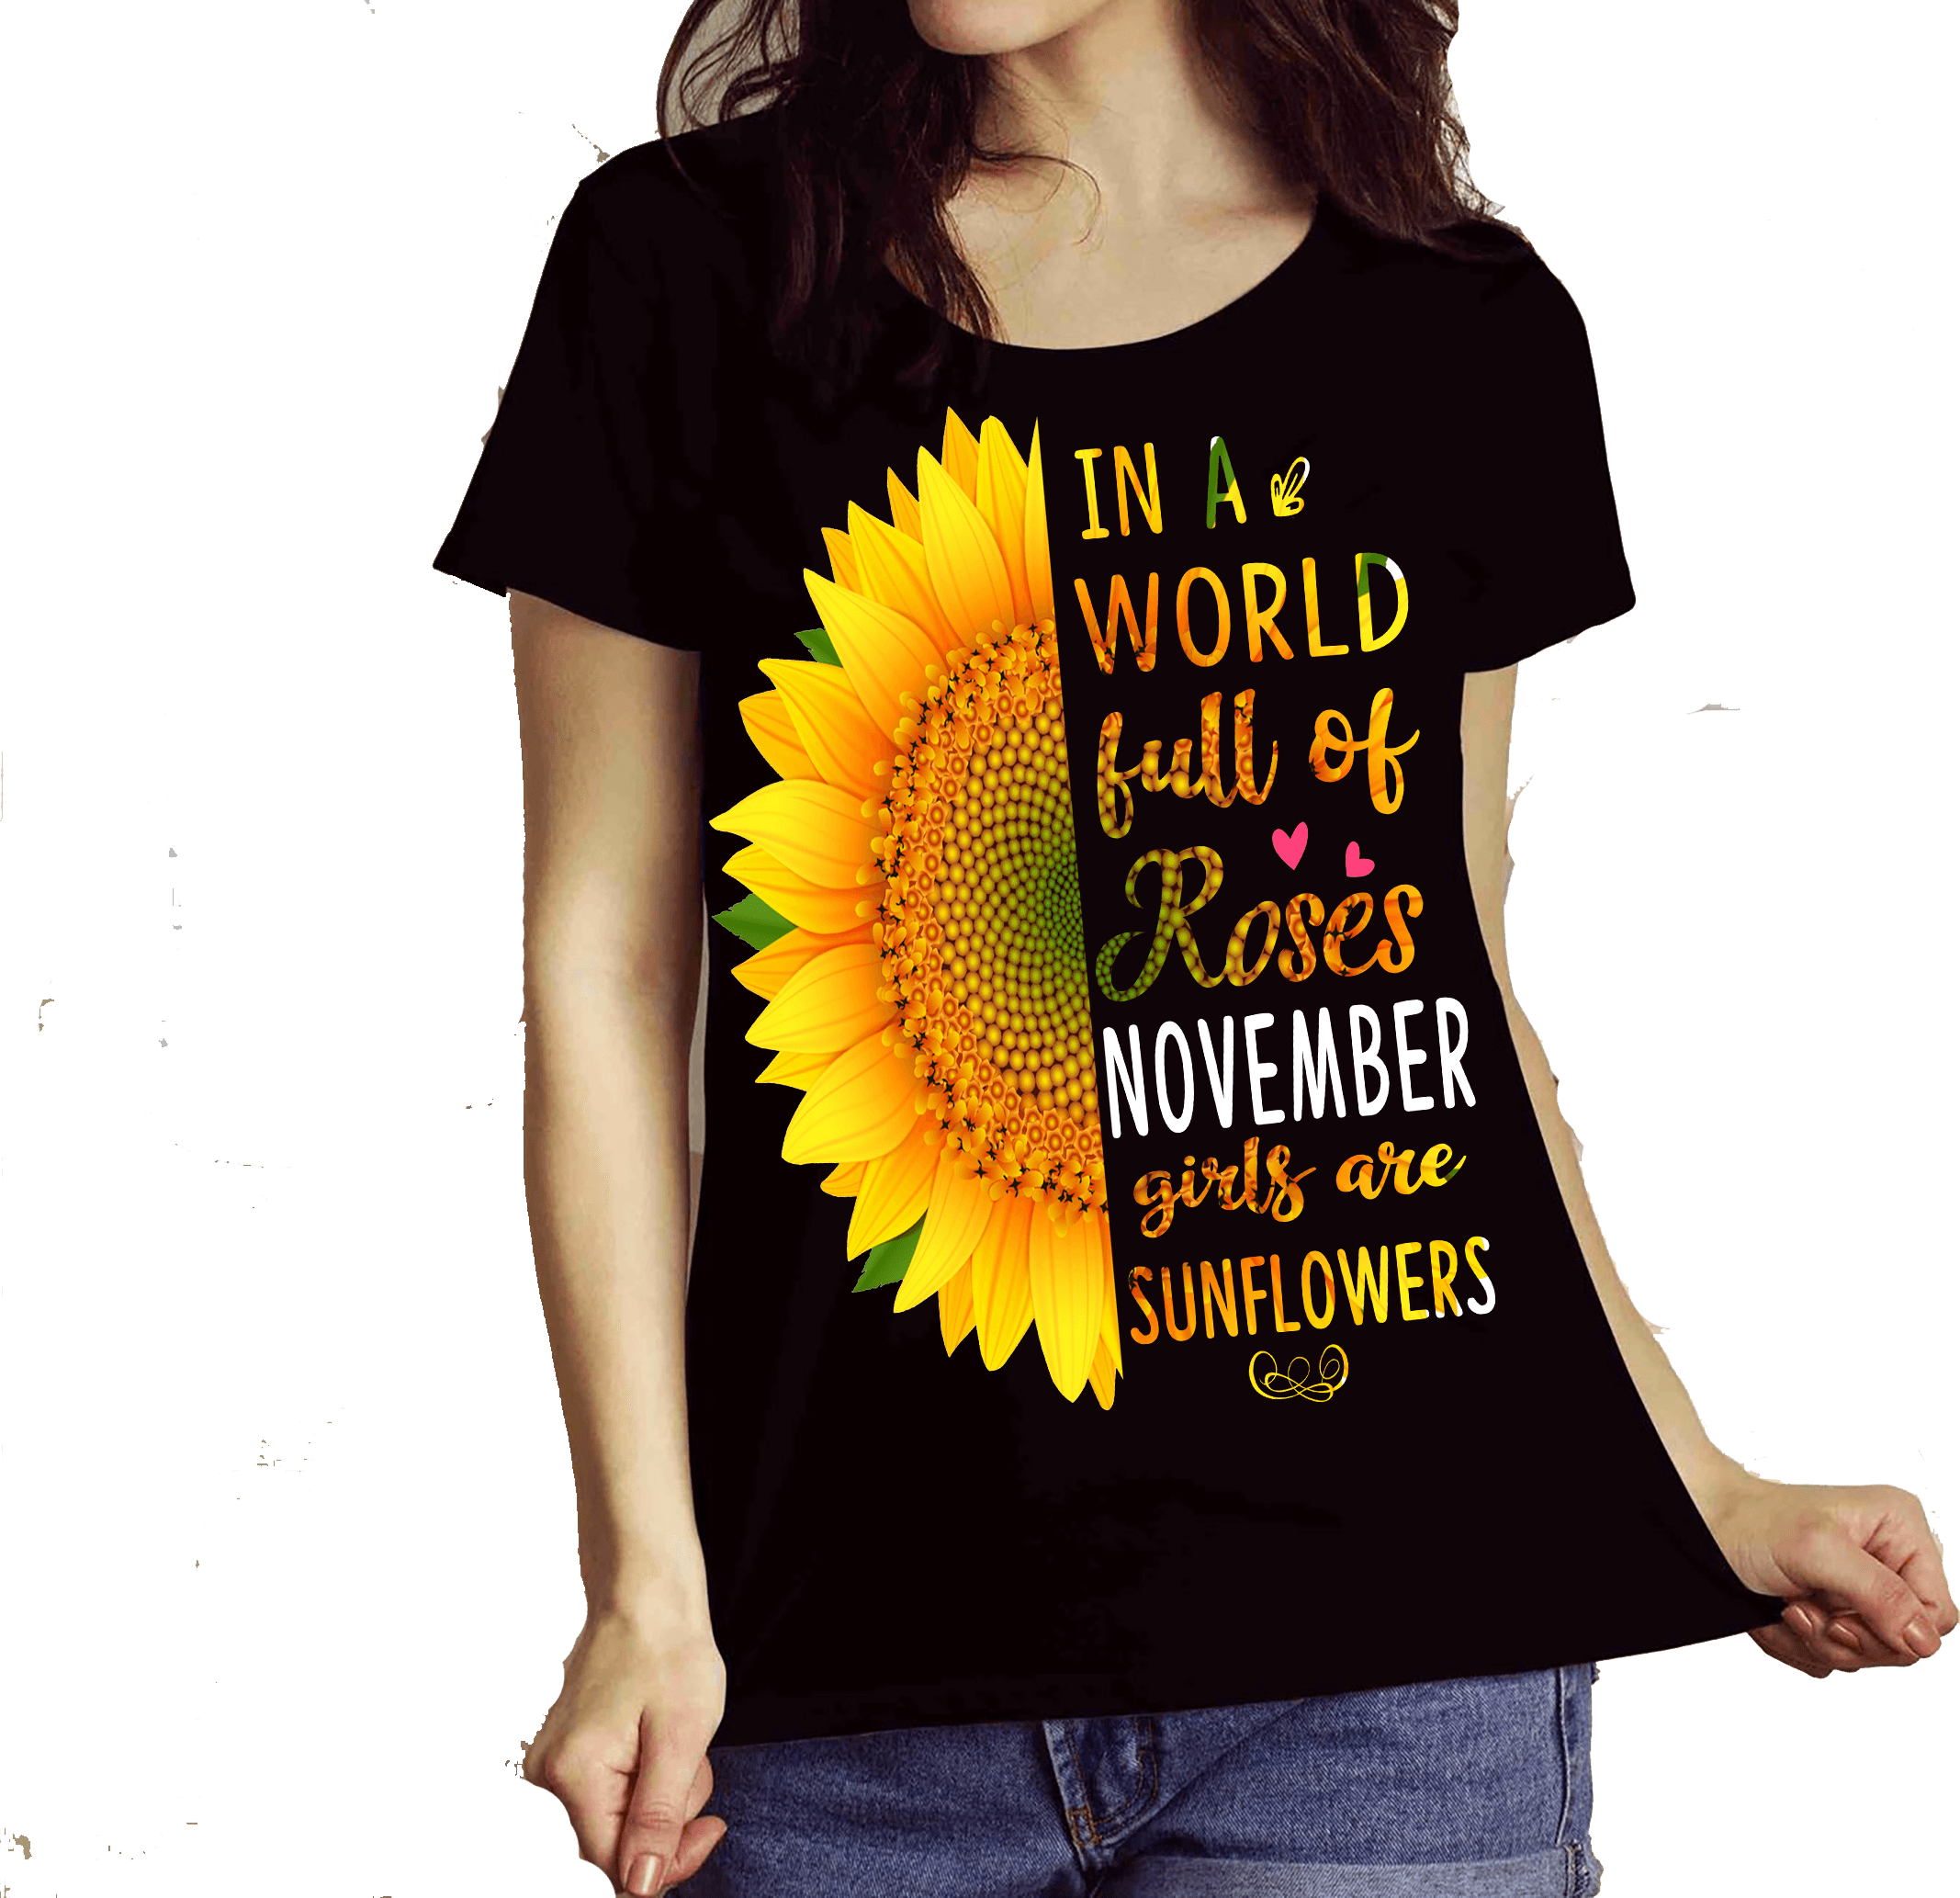 "November Combo (Sunflower And 3 Sides)" Pack of 2 Shirts